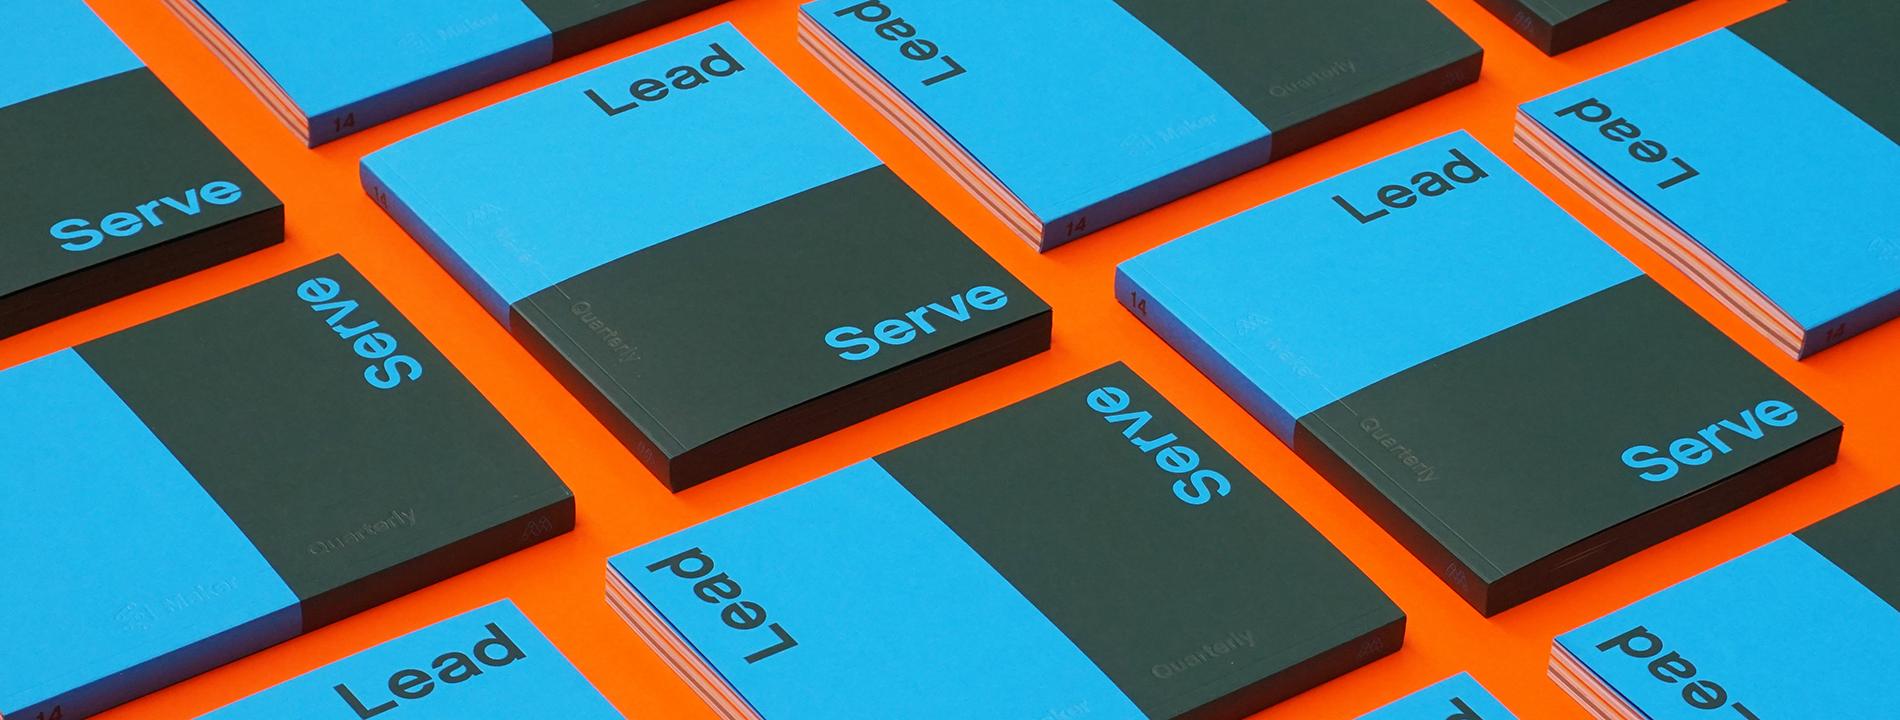 Lead and Serve issues arranged in a grid pattern on an orange background